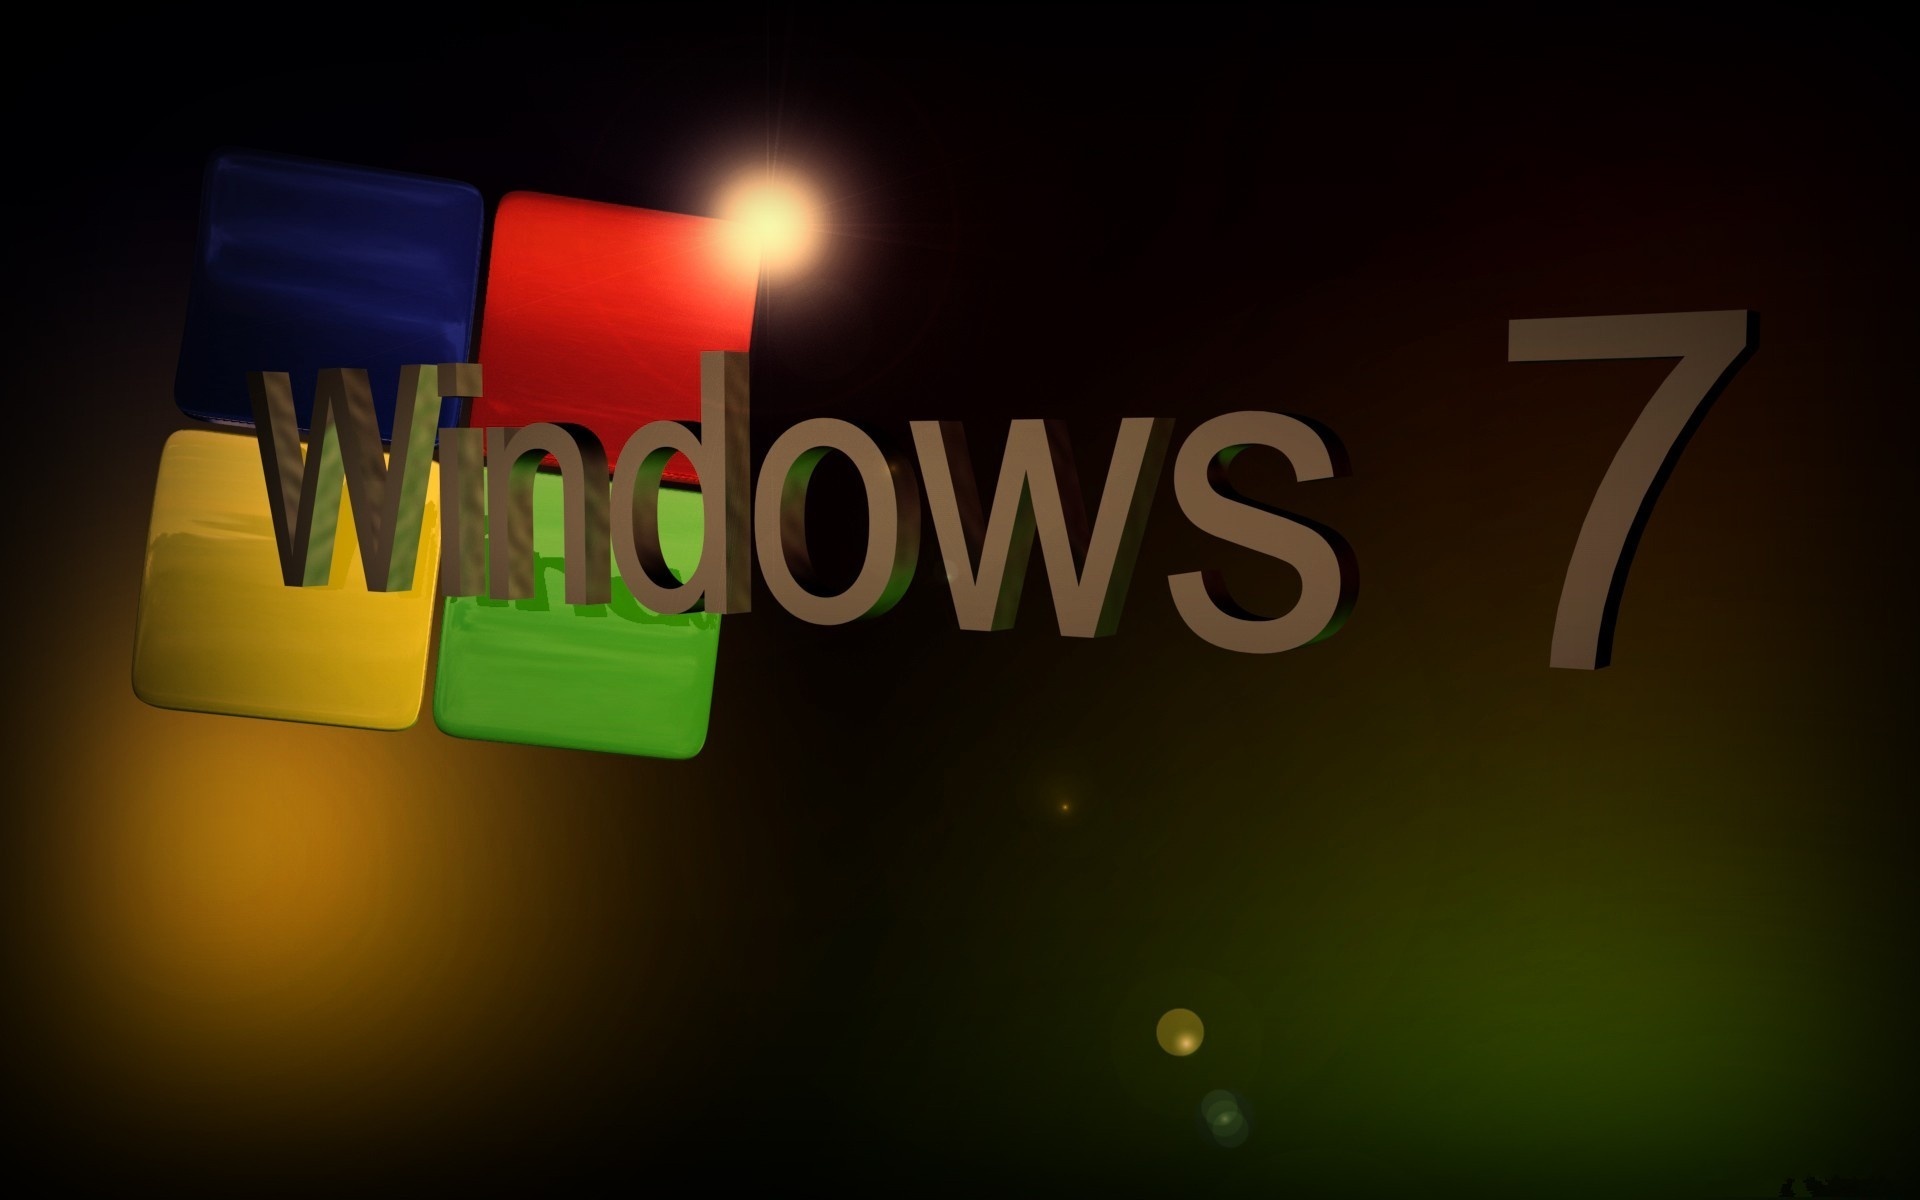 180+ Windows 7 HD Wallpapers and Backgrounds